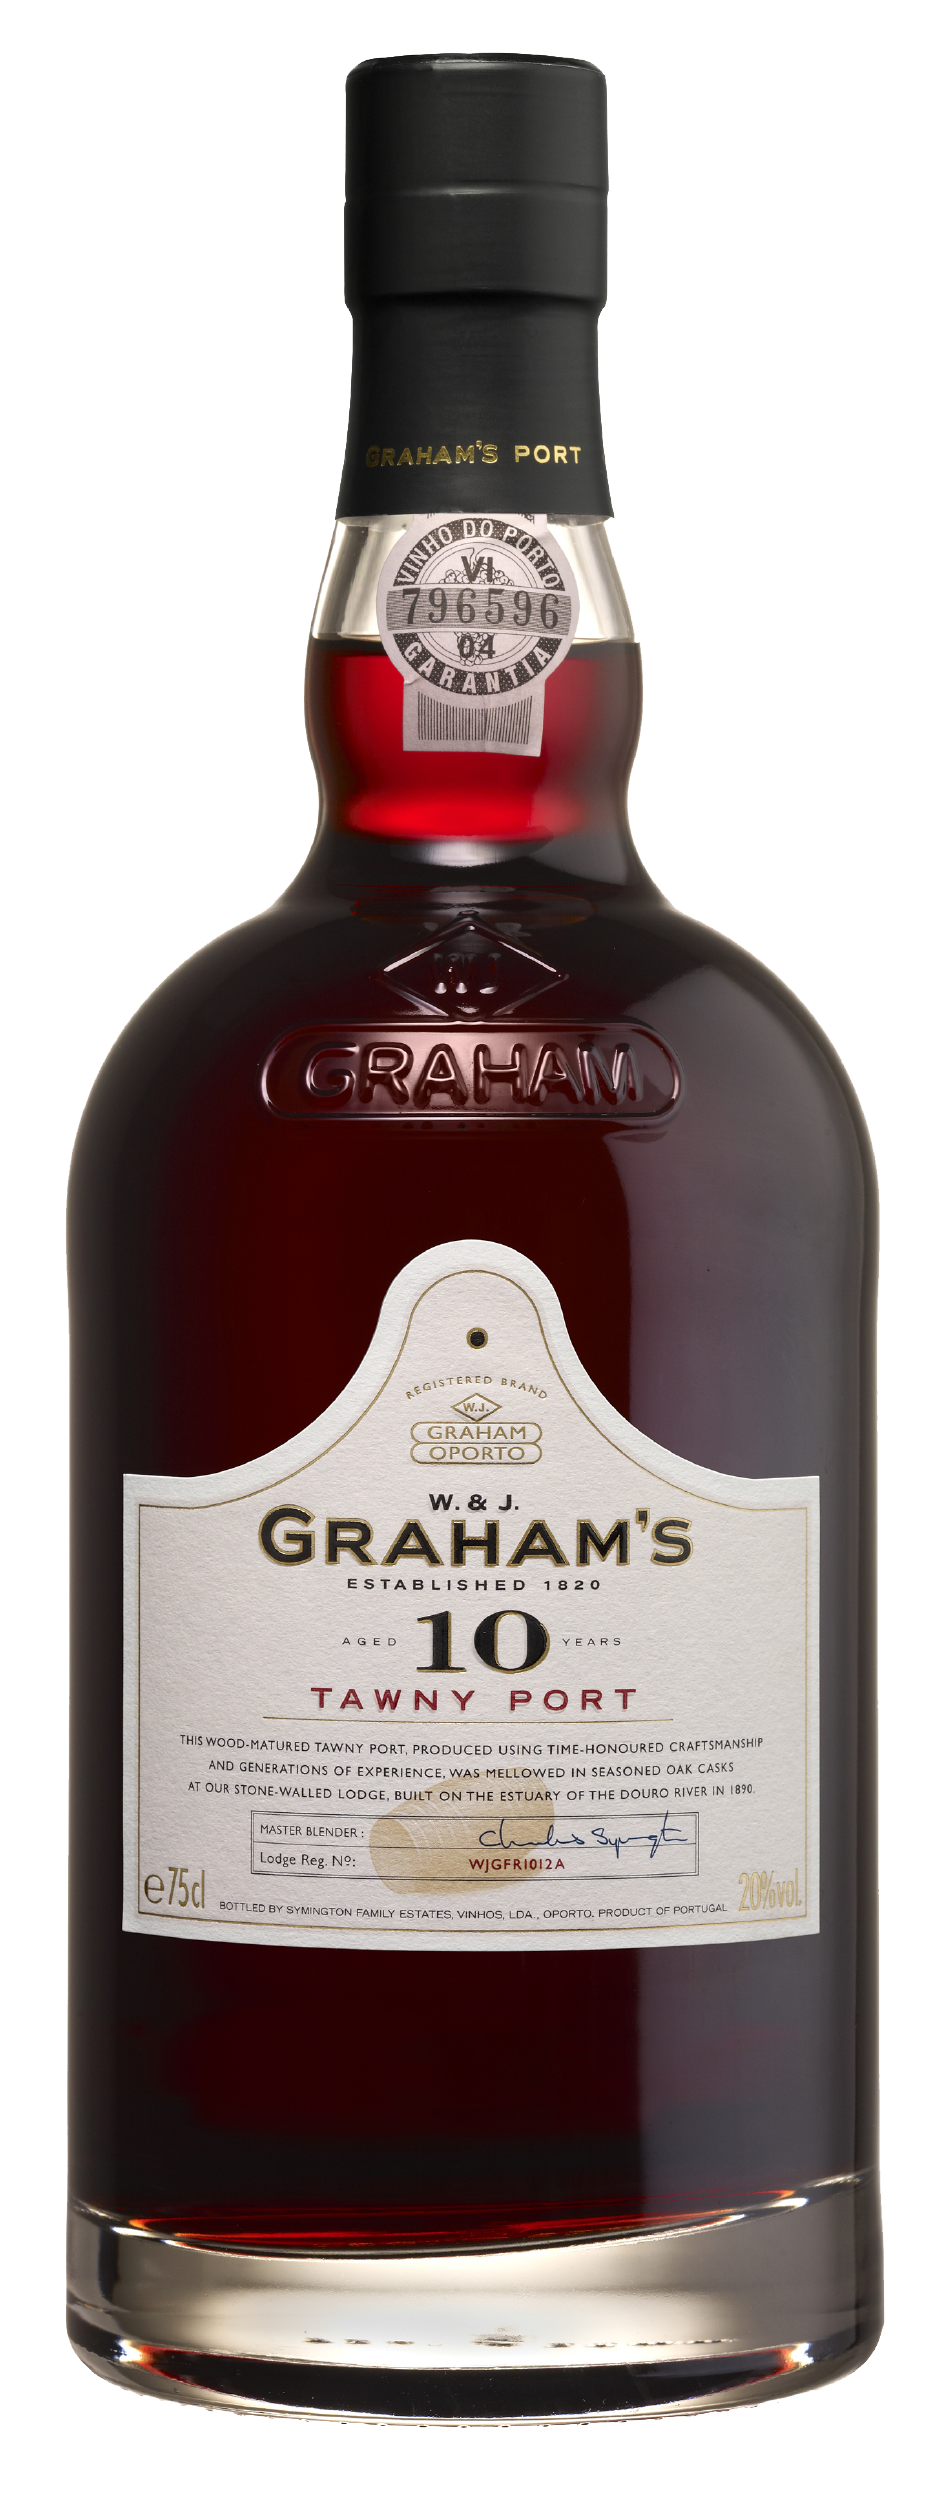 Product Image for GRAHAM'S 10 YEAR OLD TAWNY PORT